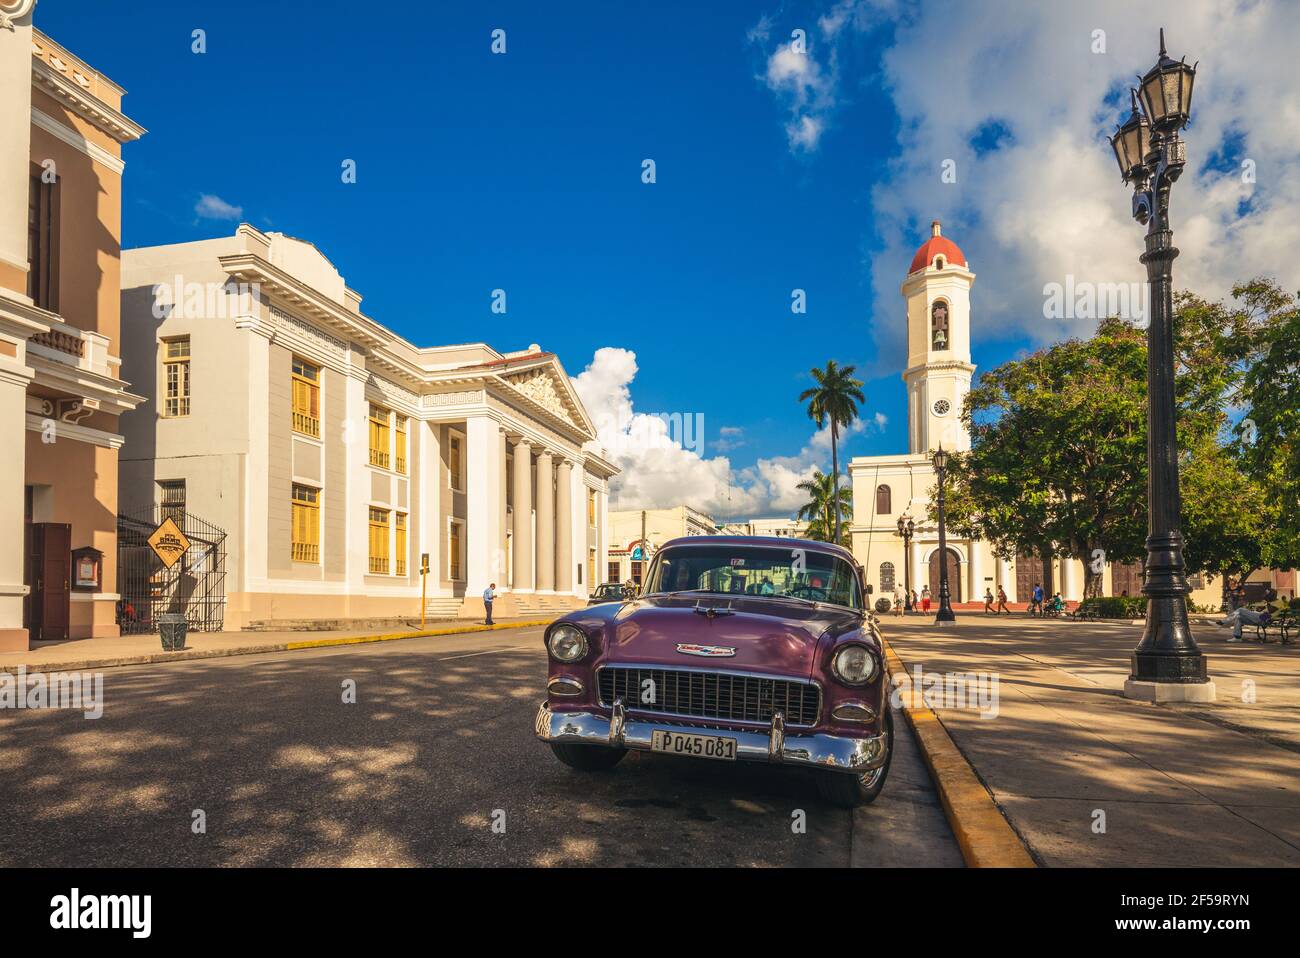 October 30, 2019: Cienfuegos Cathedral at Jose Marti Park in center of Cienfuegos, cuba. The original building was opened in 1833, and was declared Wo Stock Photo